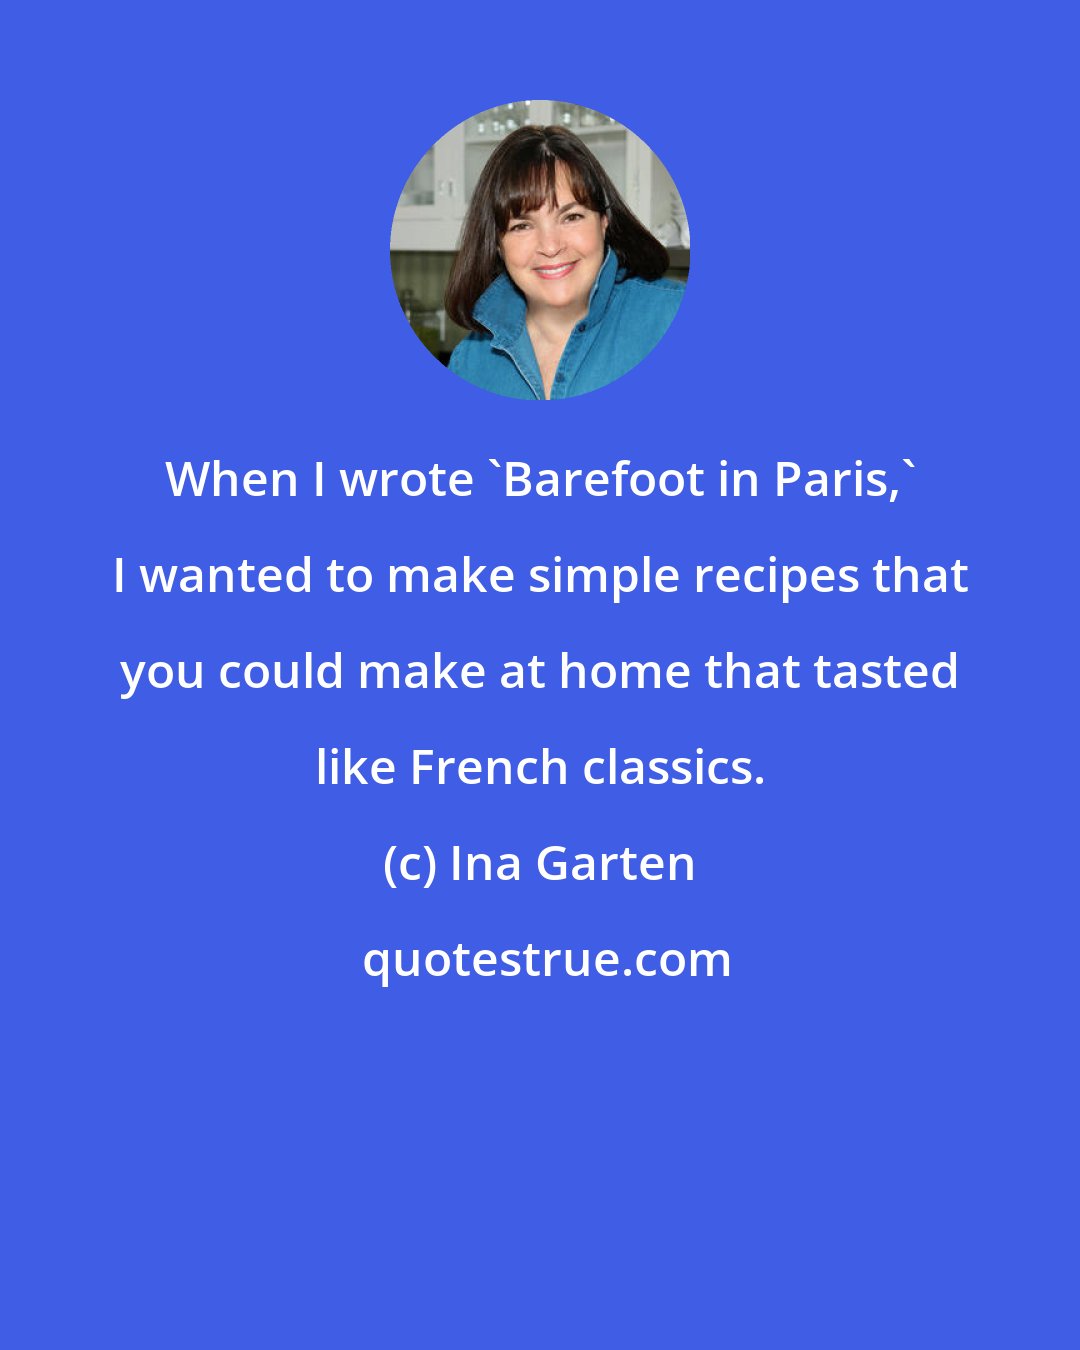 Ina Garten: When I wrote 'Barefoot in Paris,' I wanted to make simple recipes that you could make at home that tasted like French classics.